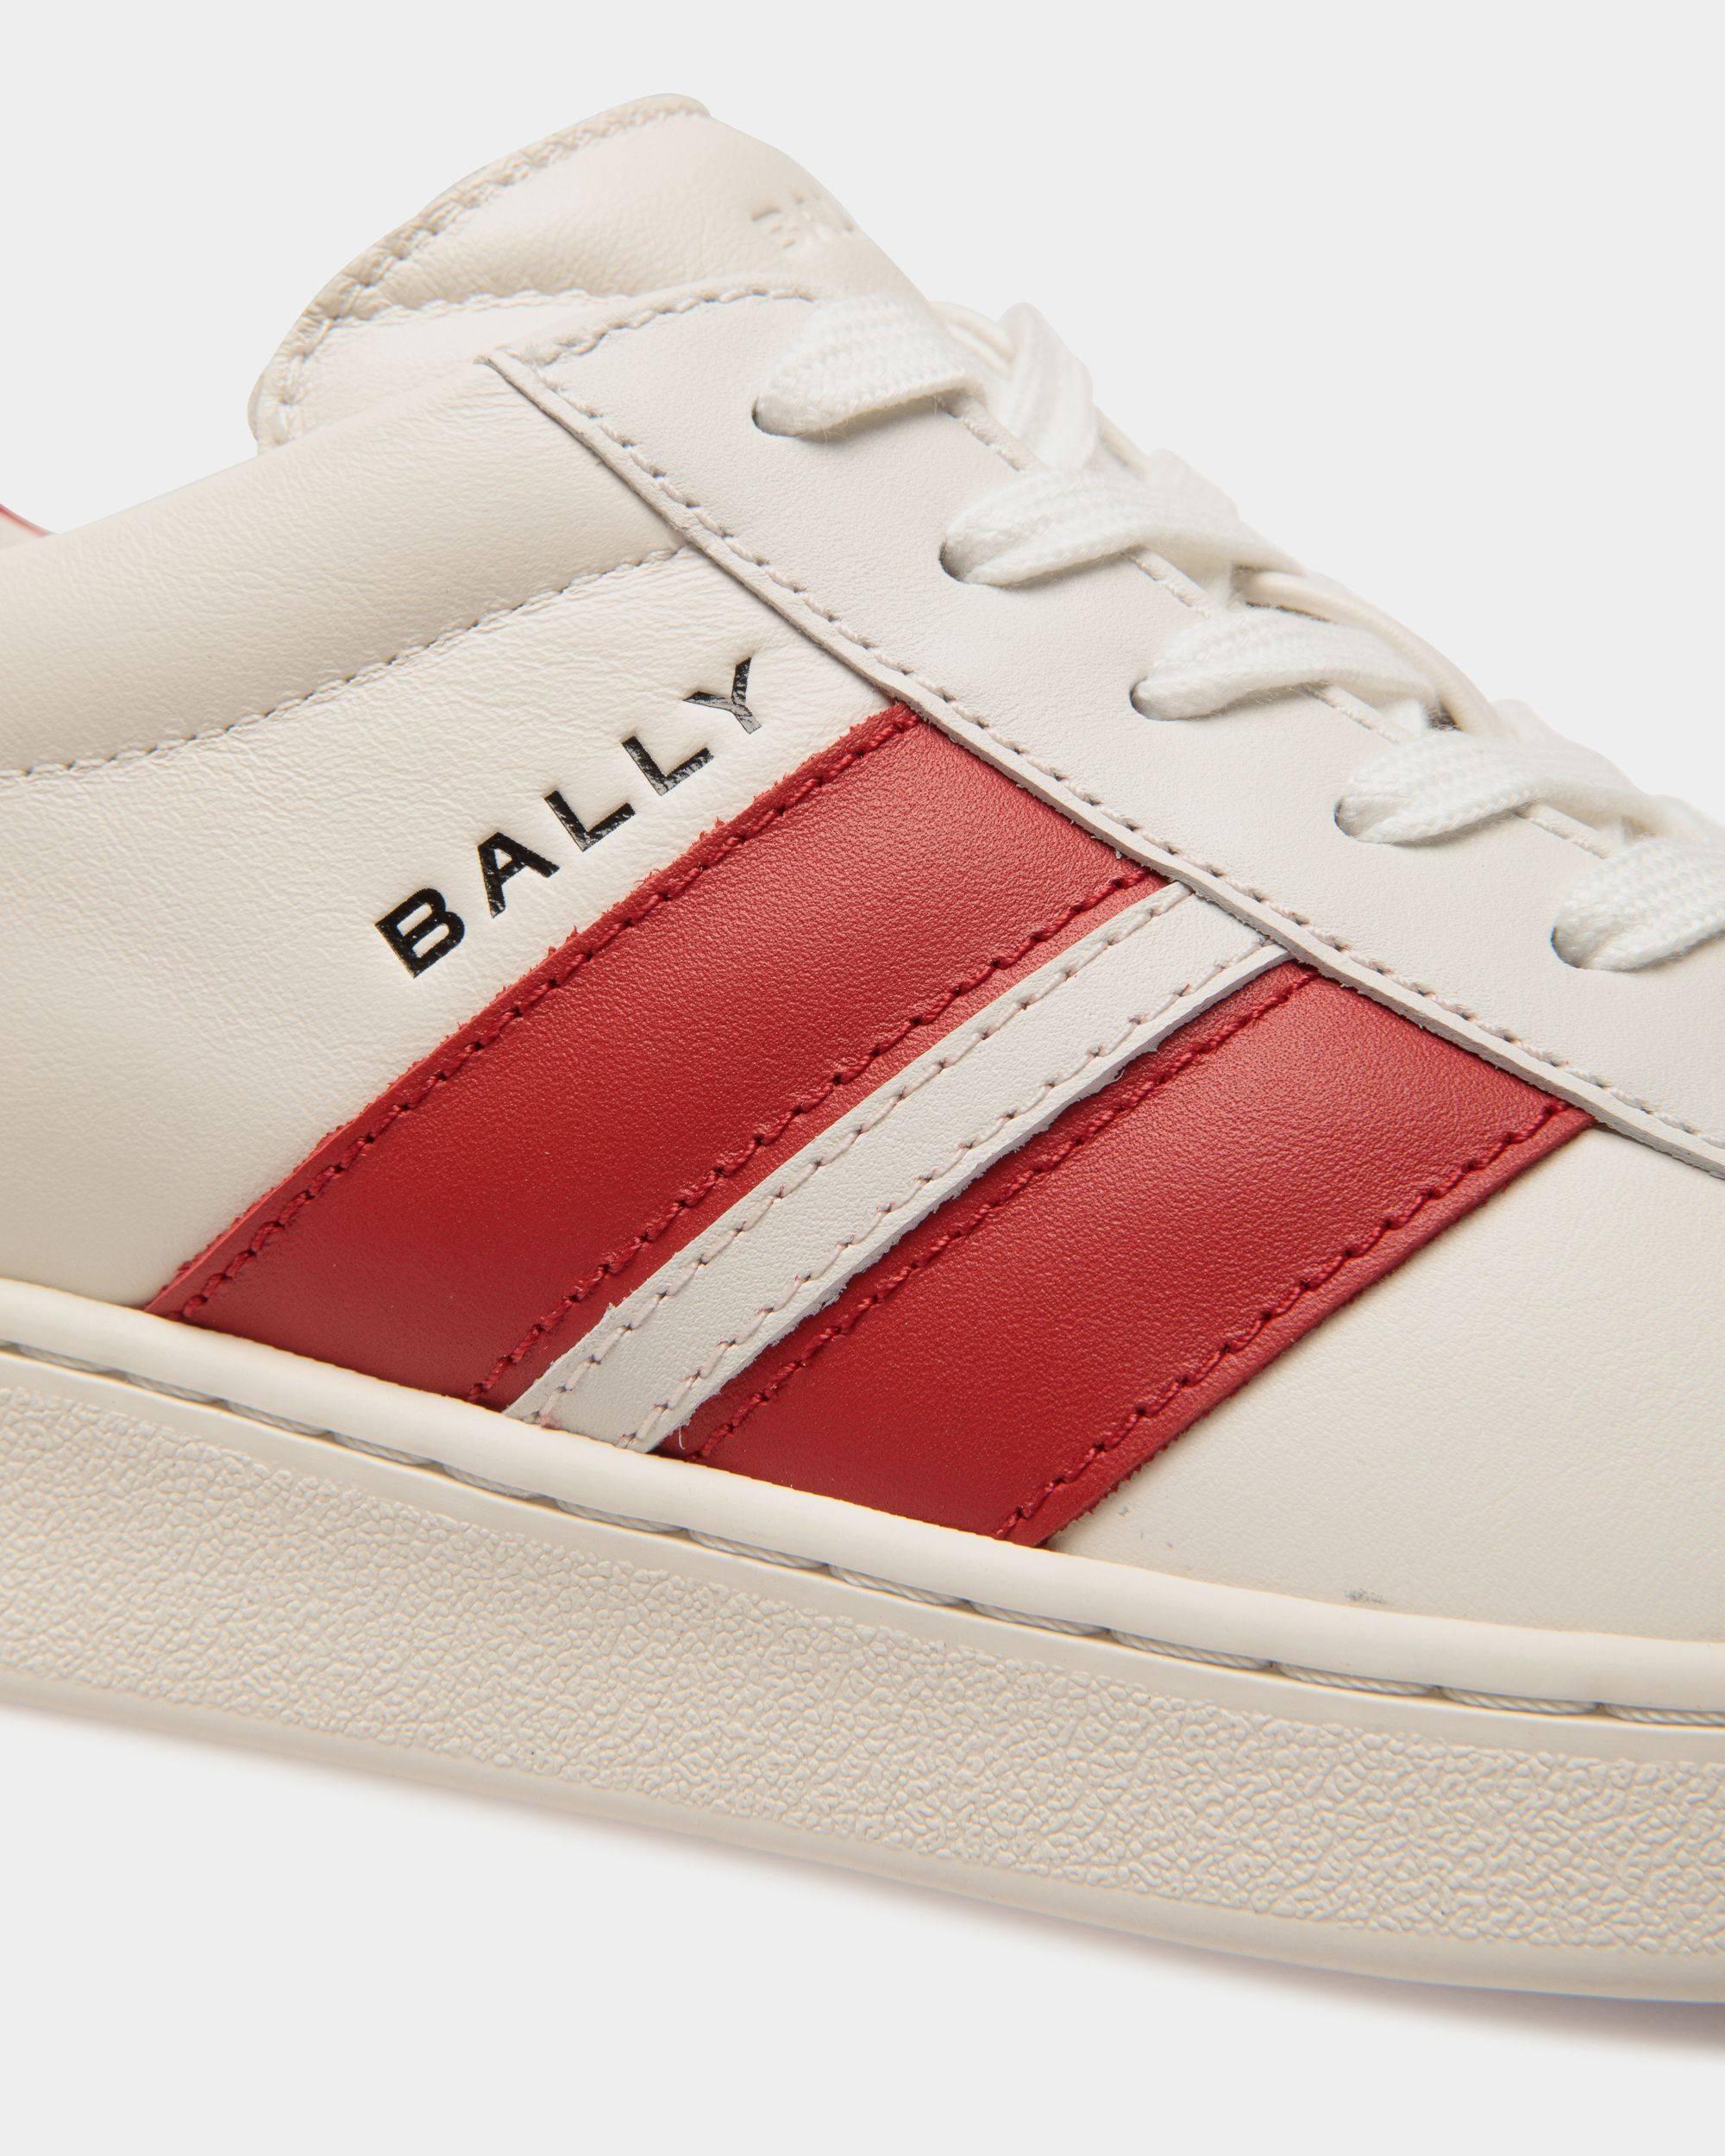 Tennis | Women's Sneaker in White and Candy Red Leather | Bally | Still Life Detail